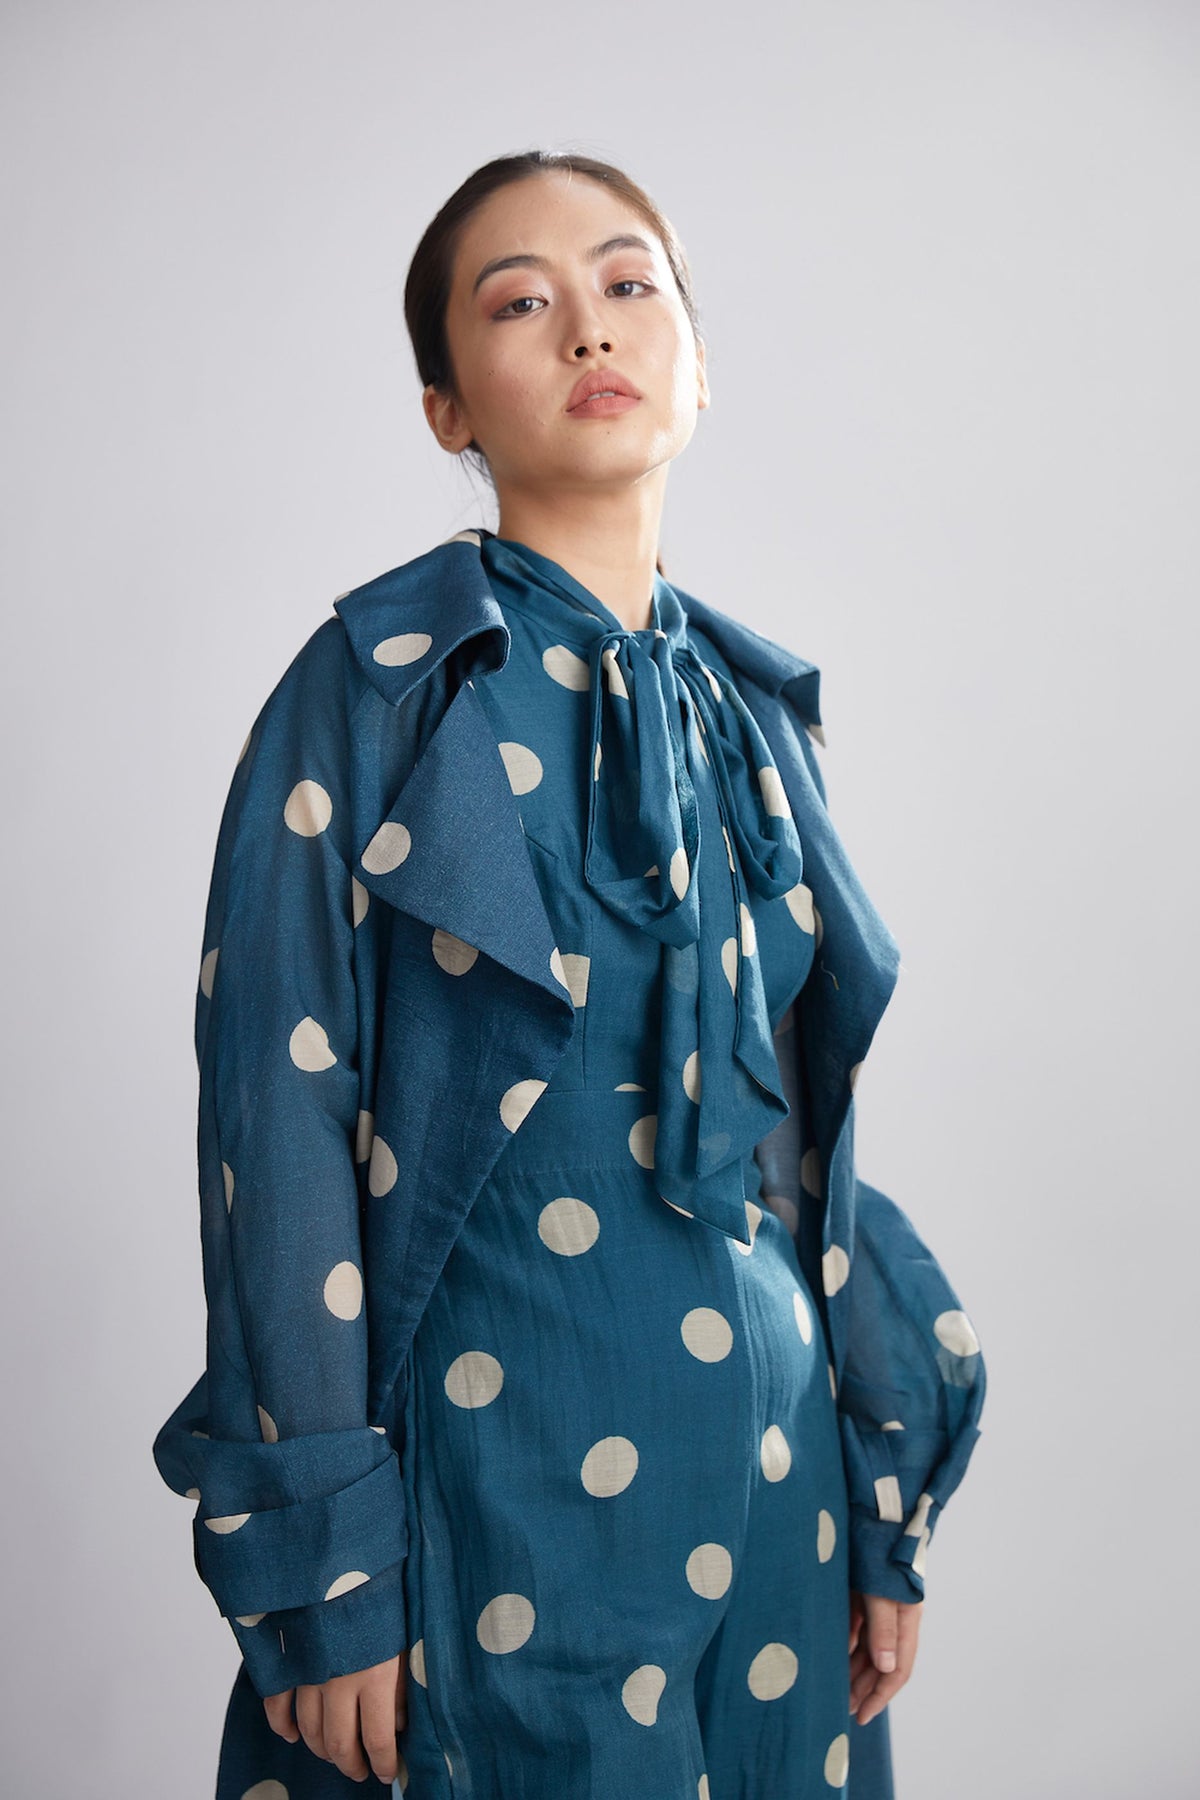 TEAL AND CREAM POLKA DOT TRENCH COVER